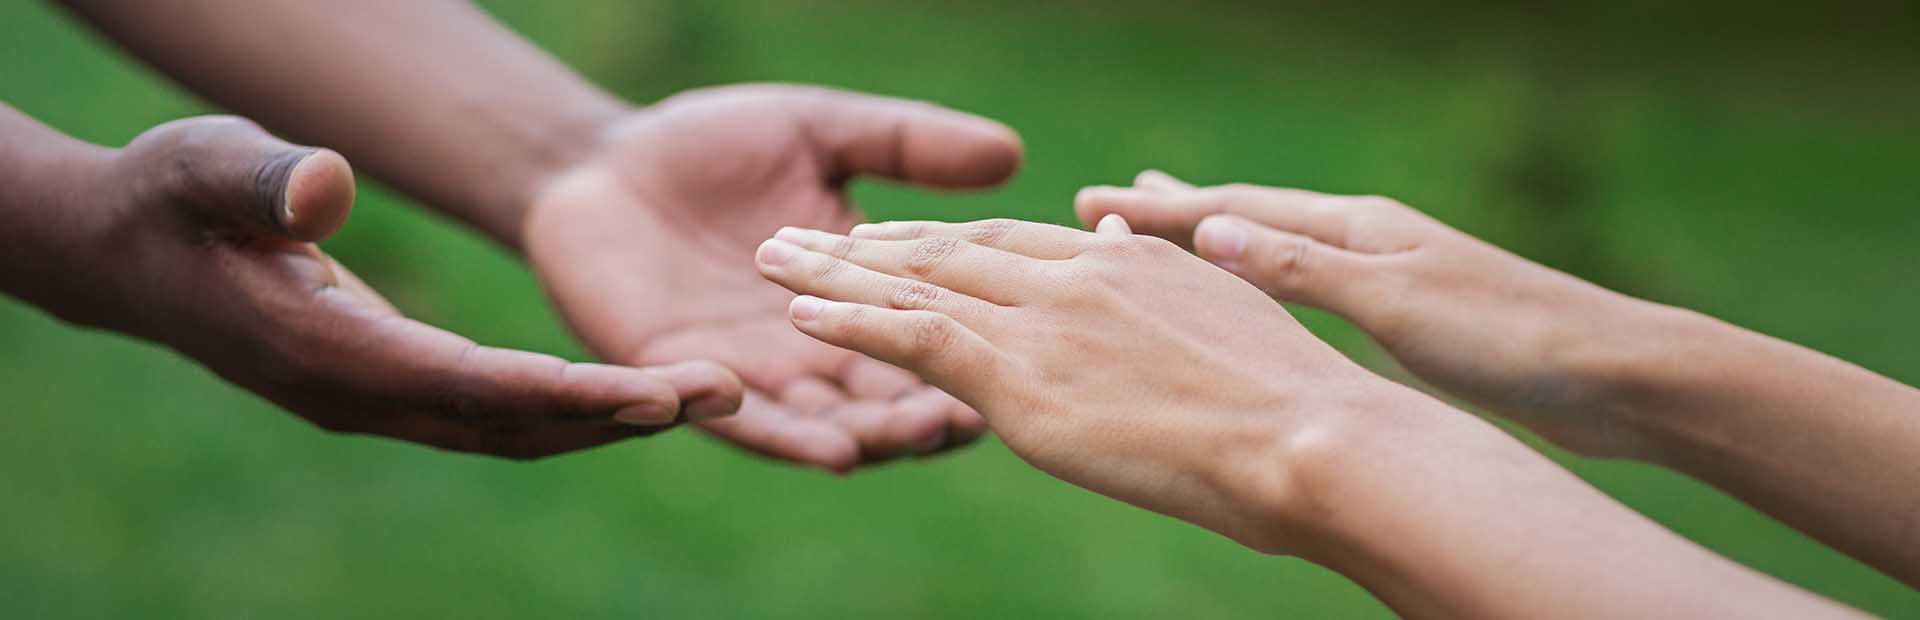 Two people extending their hands towards each other in support